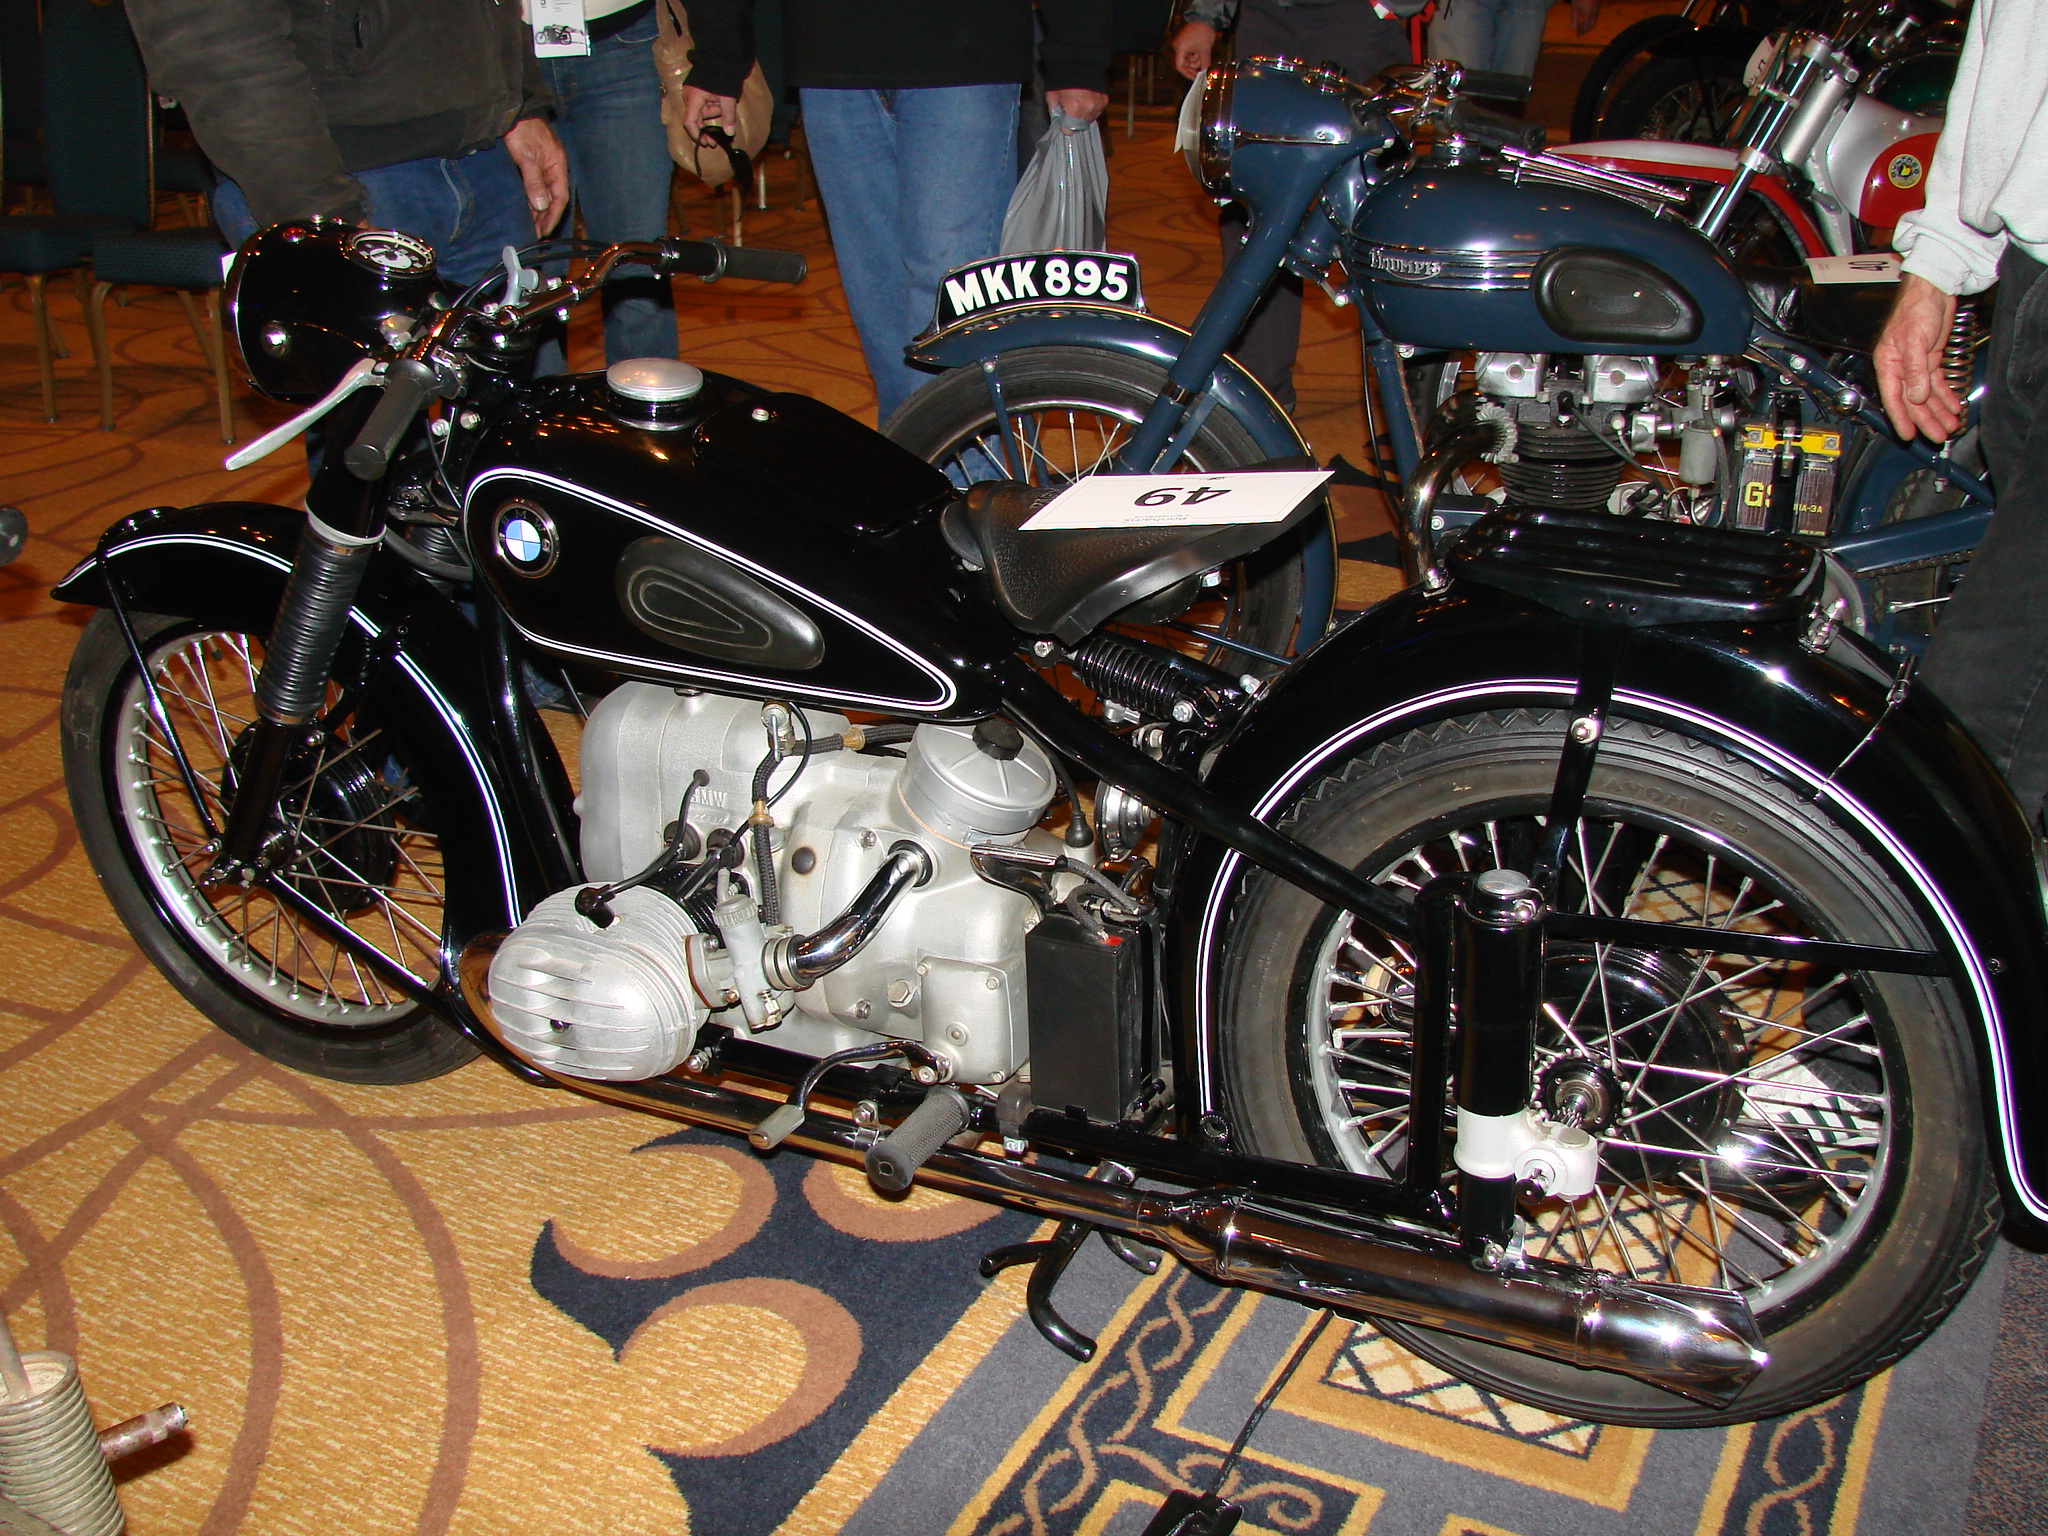 this is a vintage style motorcycle sitting on display